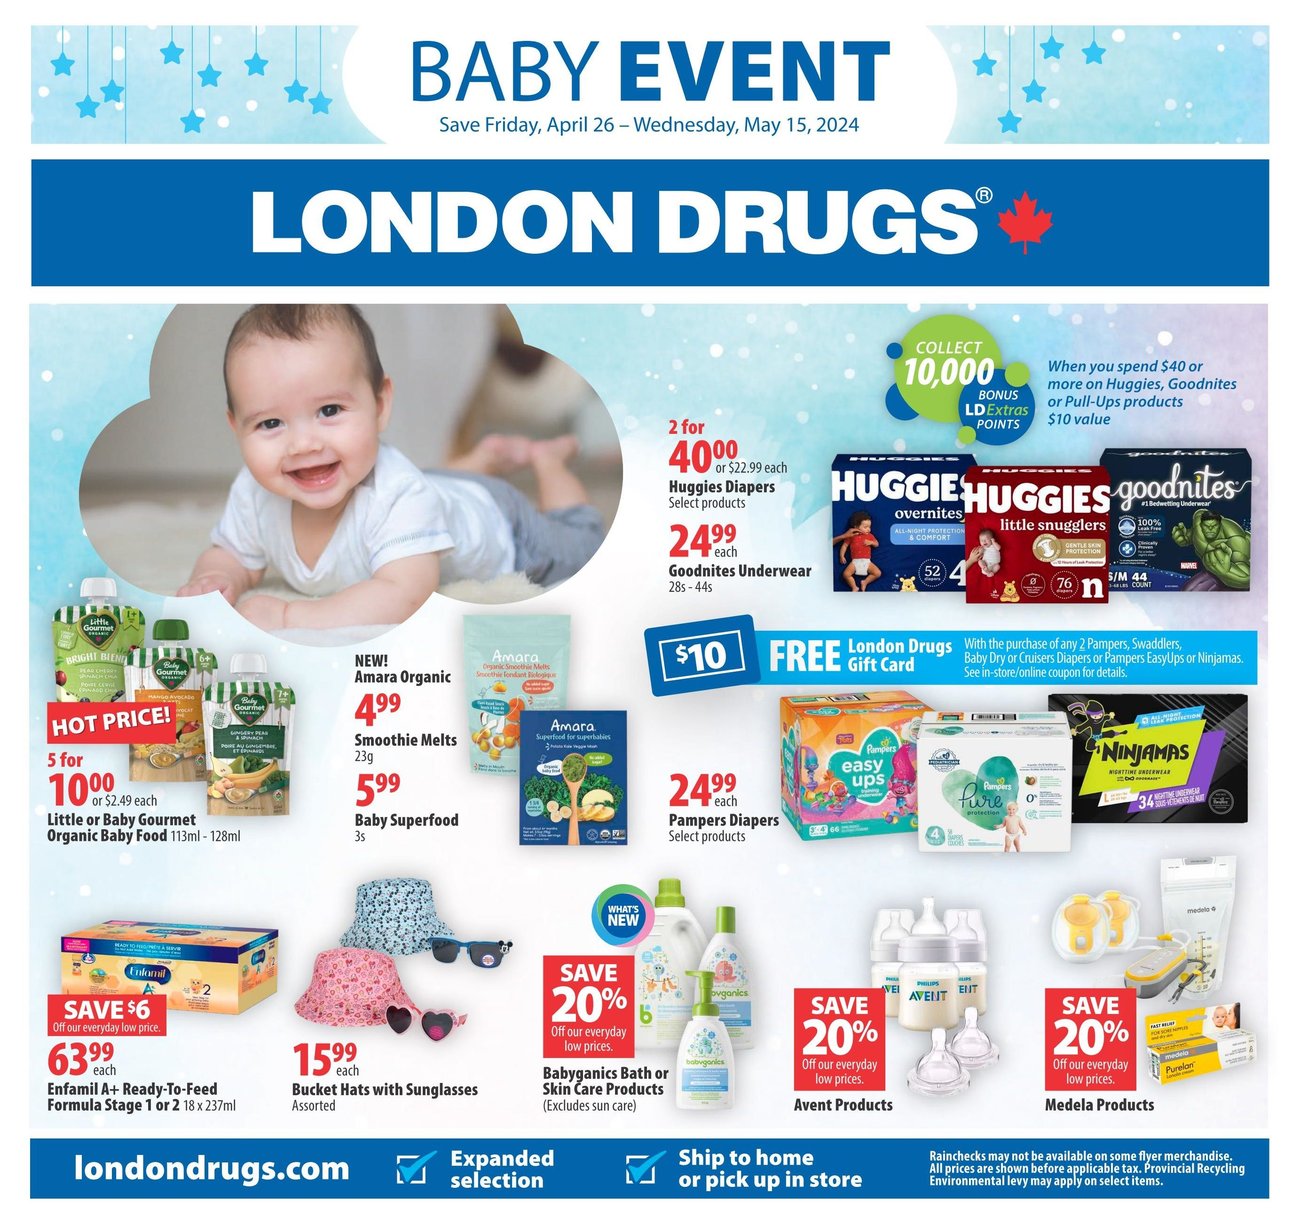 London Drugs - Baby Event - Page 1